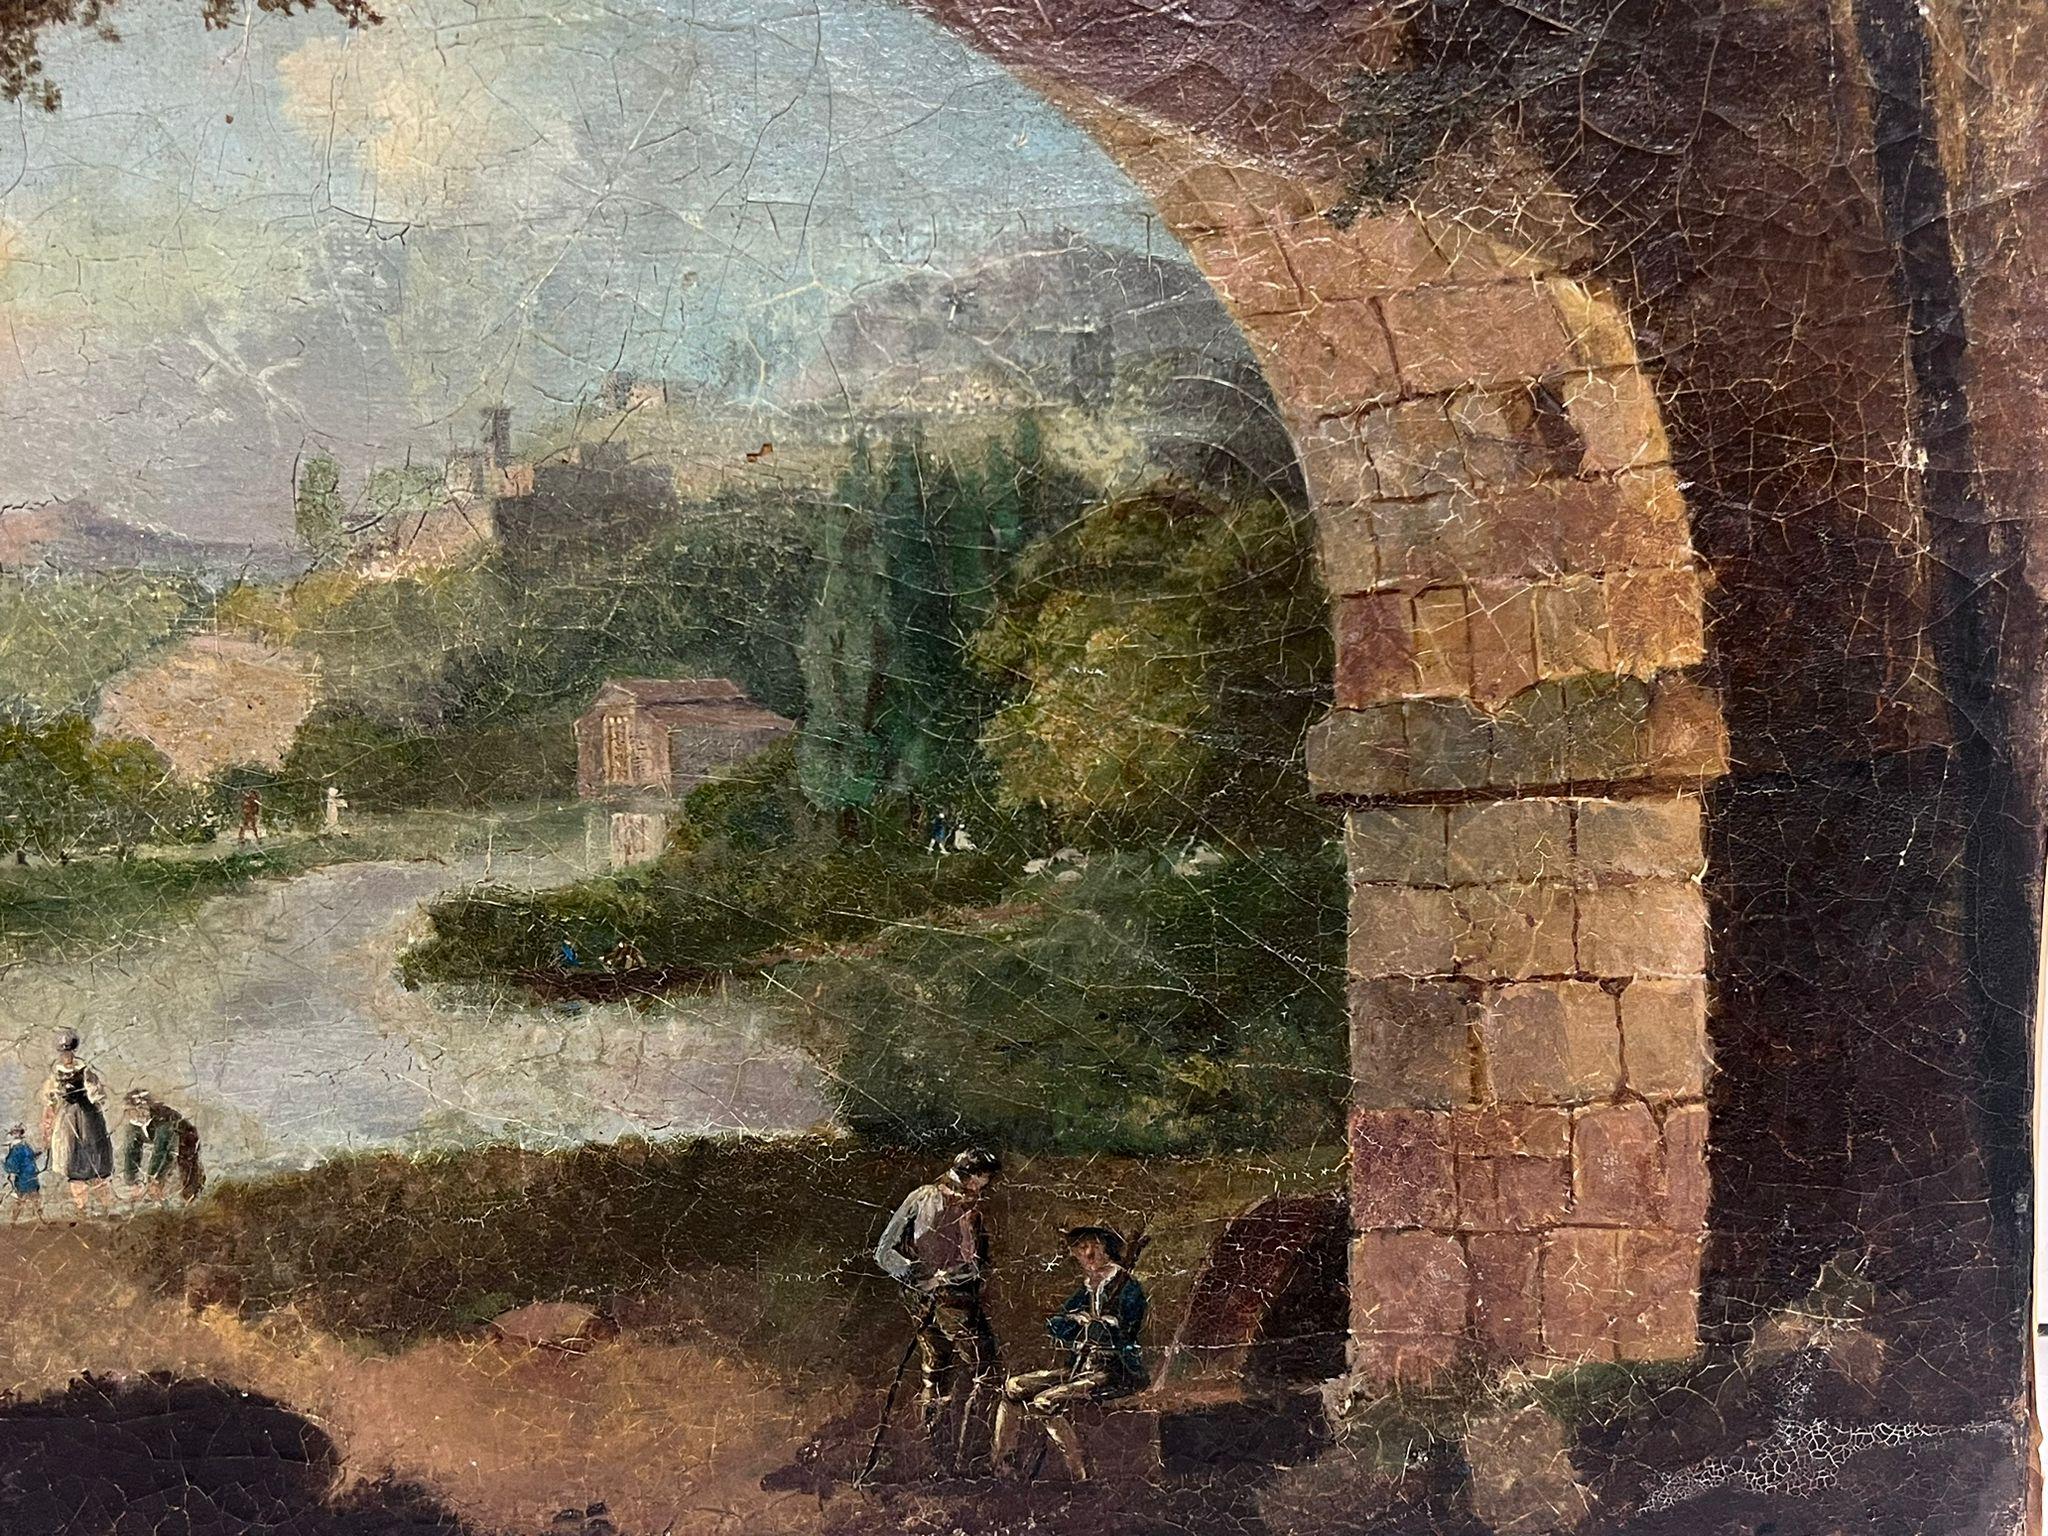 Figures under Archway
Italian School, 18th century
oil on canvas, unframed
canvas: 13.5 x 16.5 inches
provenance: private collection, United Kingdom
condition: very good and sound condition, some old cracking and crazing to the paint in parts. 